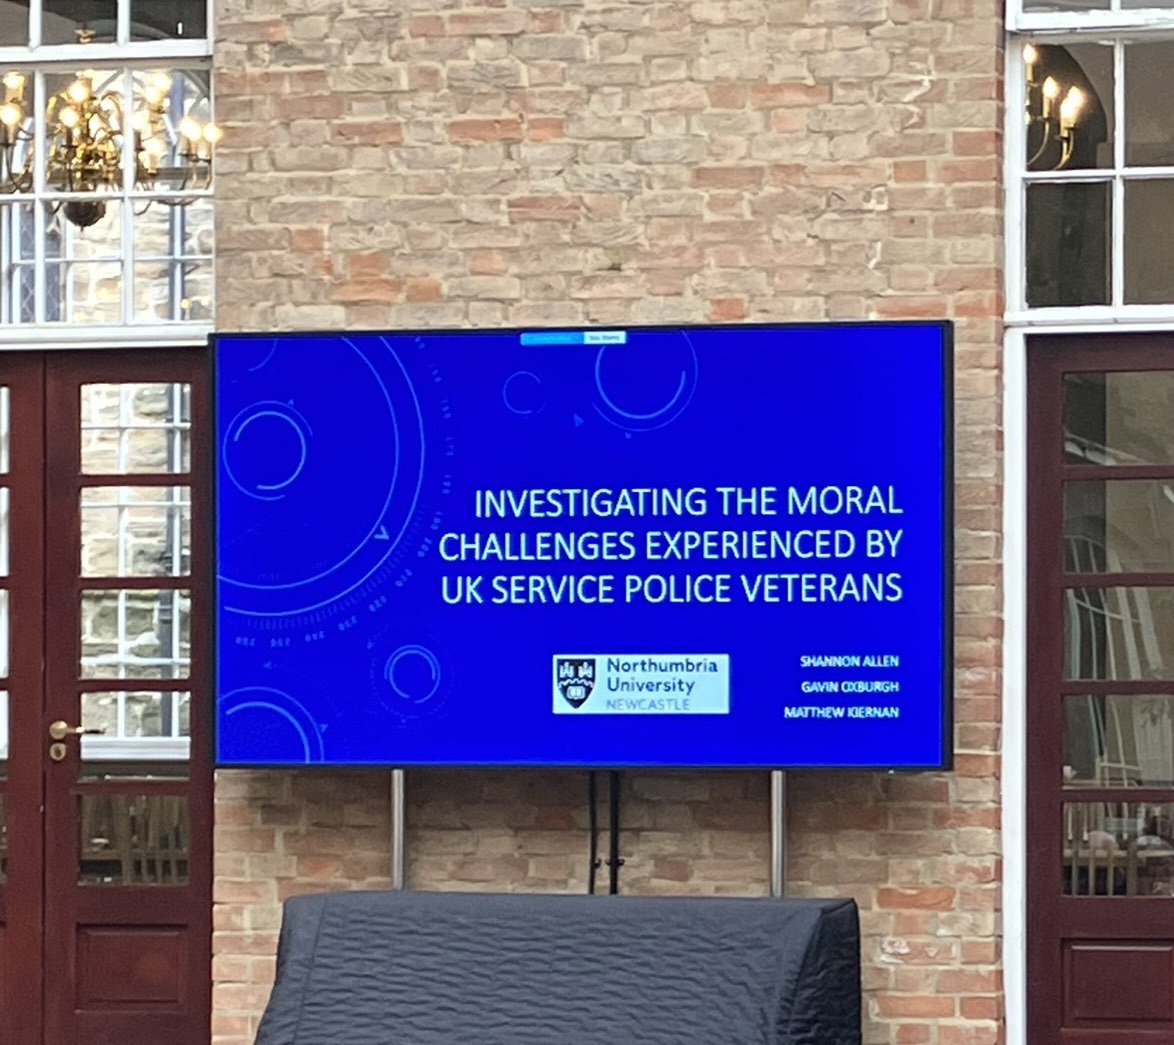 Another great day of thought provoking #moralinjury presentations and discussions at the #icmiconf. Thank you @ic_moralinjury for the opportunity to present our work on UK service police veterans.
Full article:
doi.org/10.21061/jvs.v…
@gavin_oxburgh @mattkiernan95 @Northern_Hub